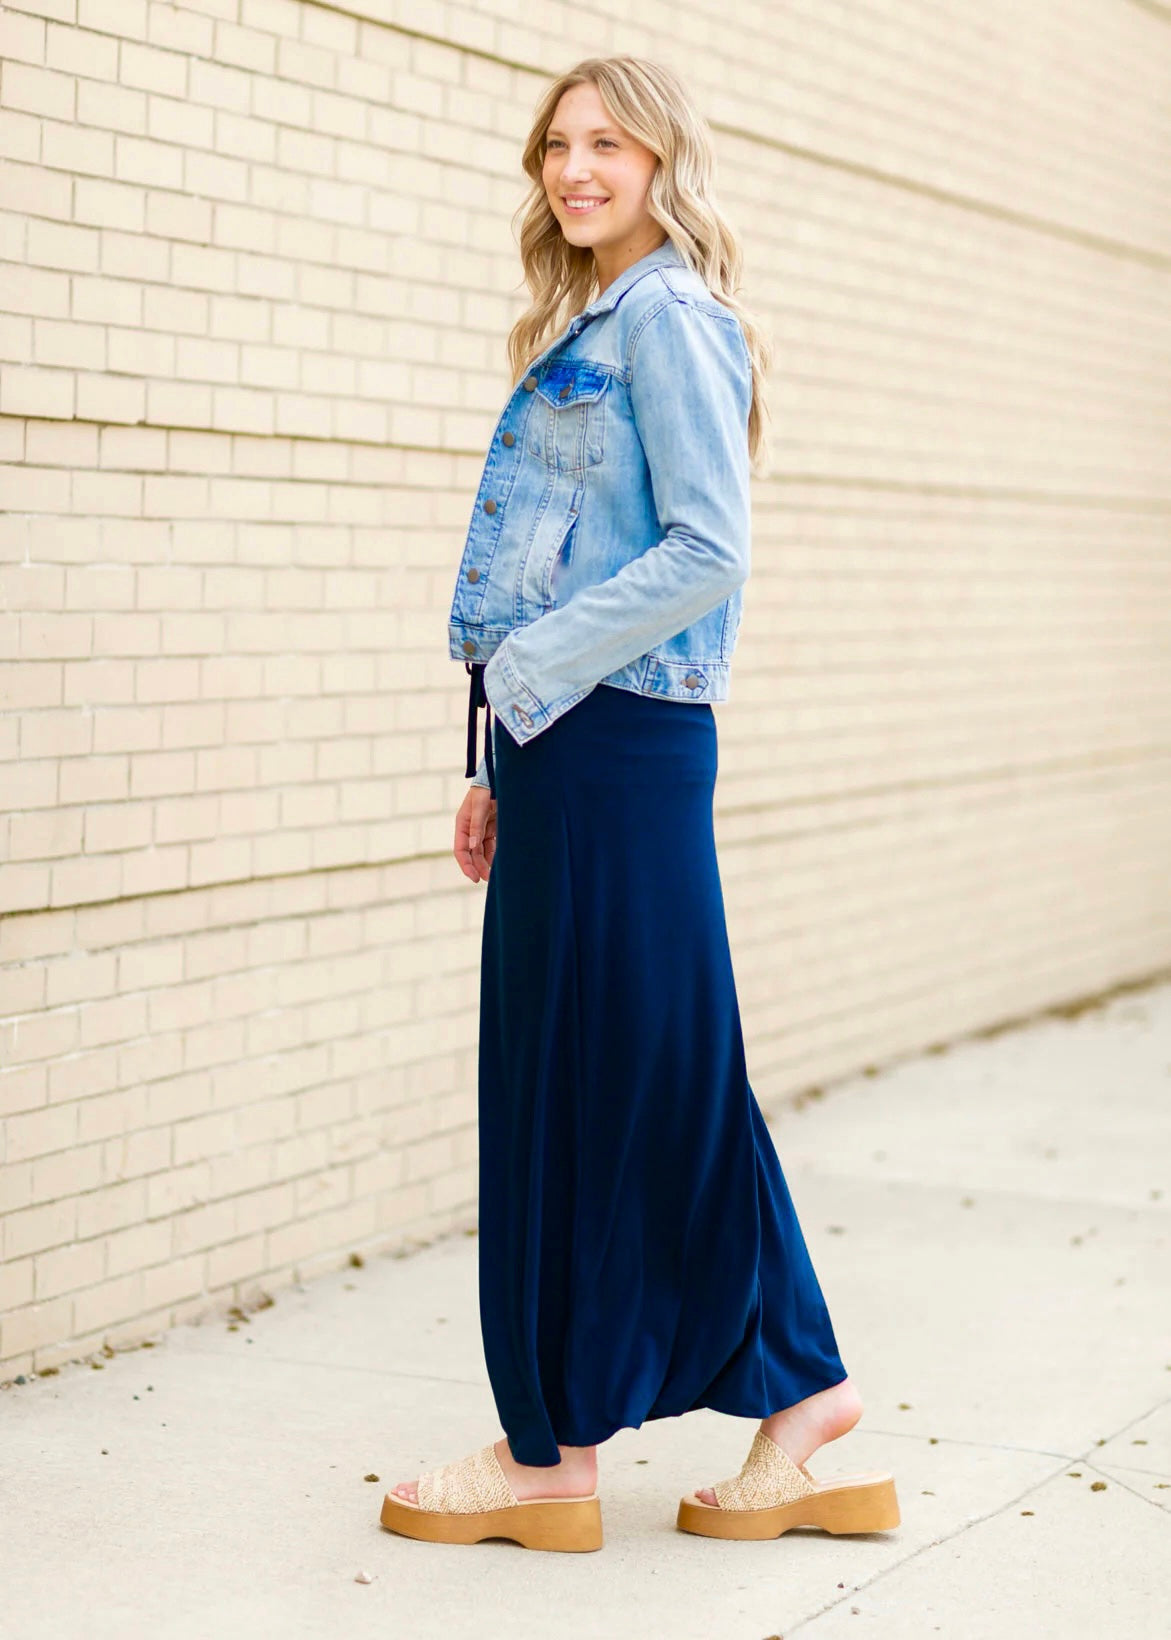 Side view of a young blonde woman wearing a denim jacket and navy blue Maxi Skirt with Pockets featuring a Soft & Stretchy Premium Fabric Blend, Adjustable Drawstring Tie Waist, and Pockets. Available in sizes S-3XL in both solid Black or Navy Blue. Discover our Best Selling All-year All-season Maxi Skirt for every body shape & size. 